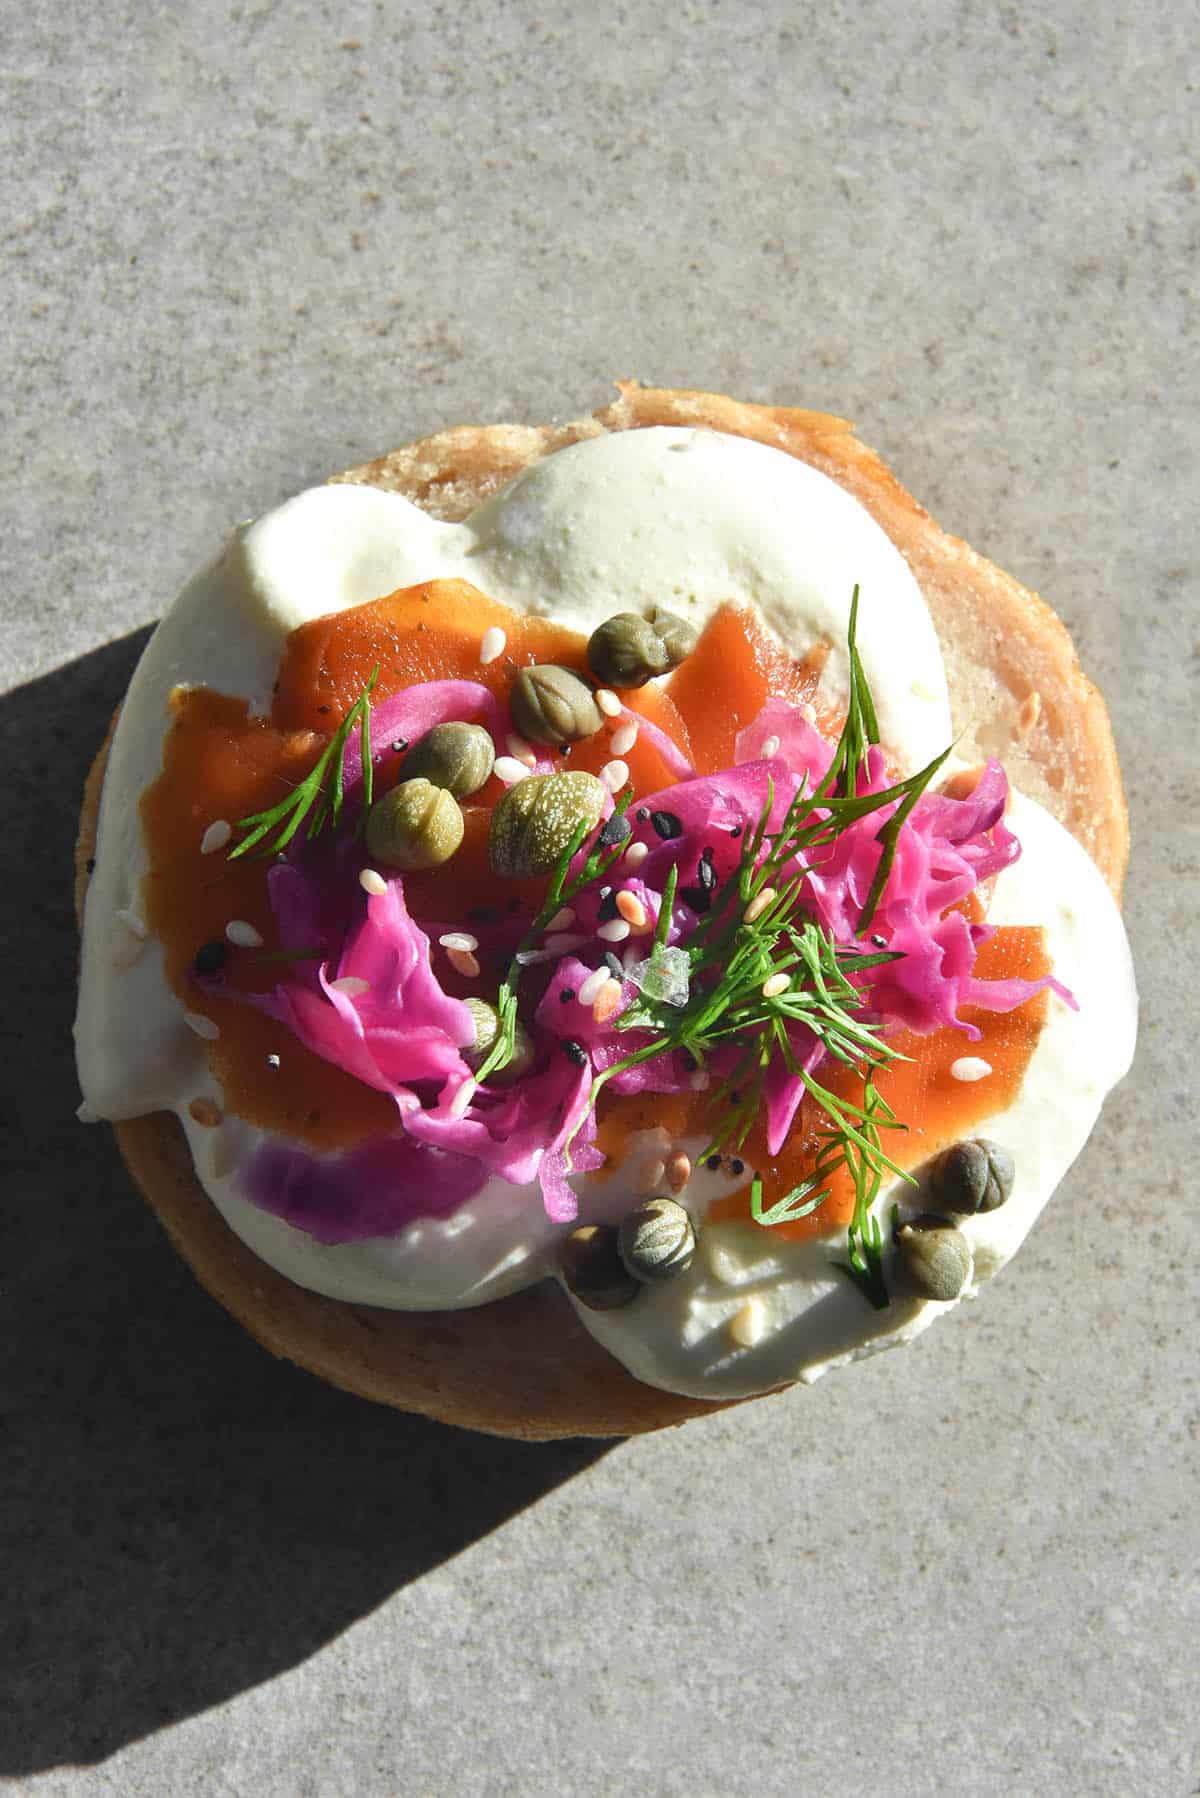 An aerial image of a topped bagel half bathed in bright sunlight on a grey stone background. The bagel is topped with whipped lactose free mascarpone, easy carrot lox, FODMAP friendly pickled onions and capers.